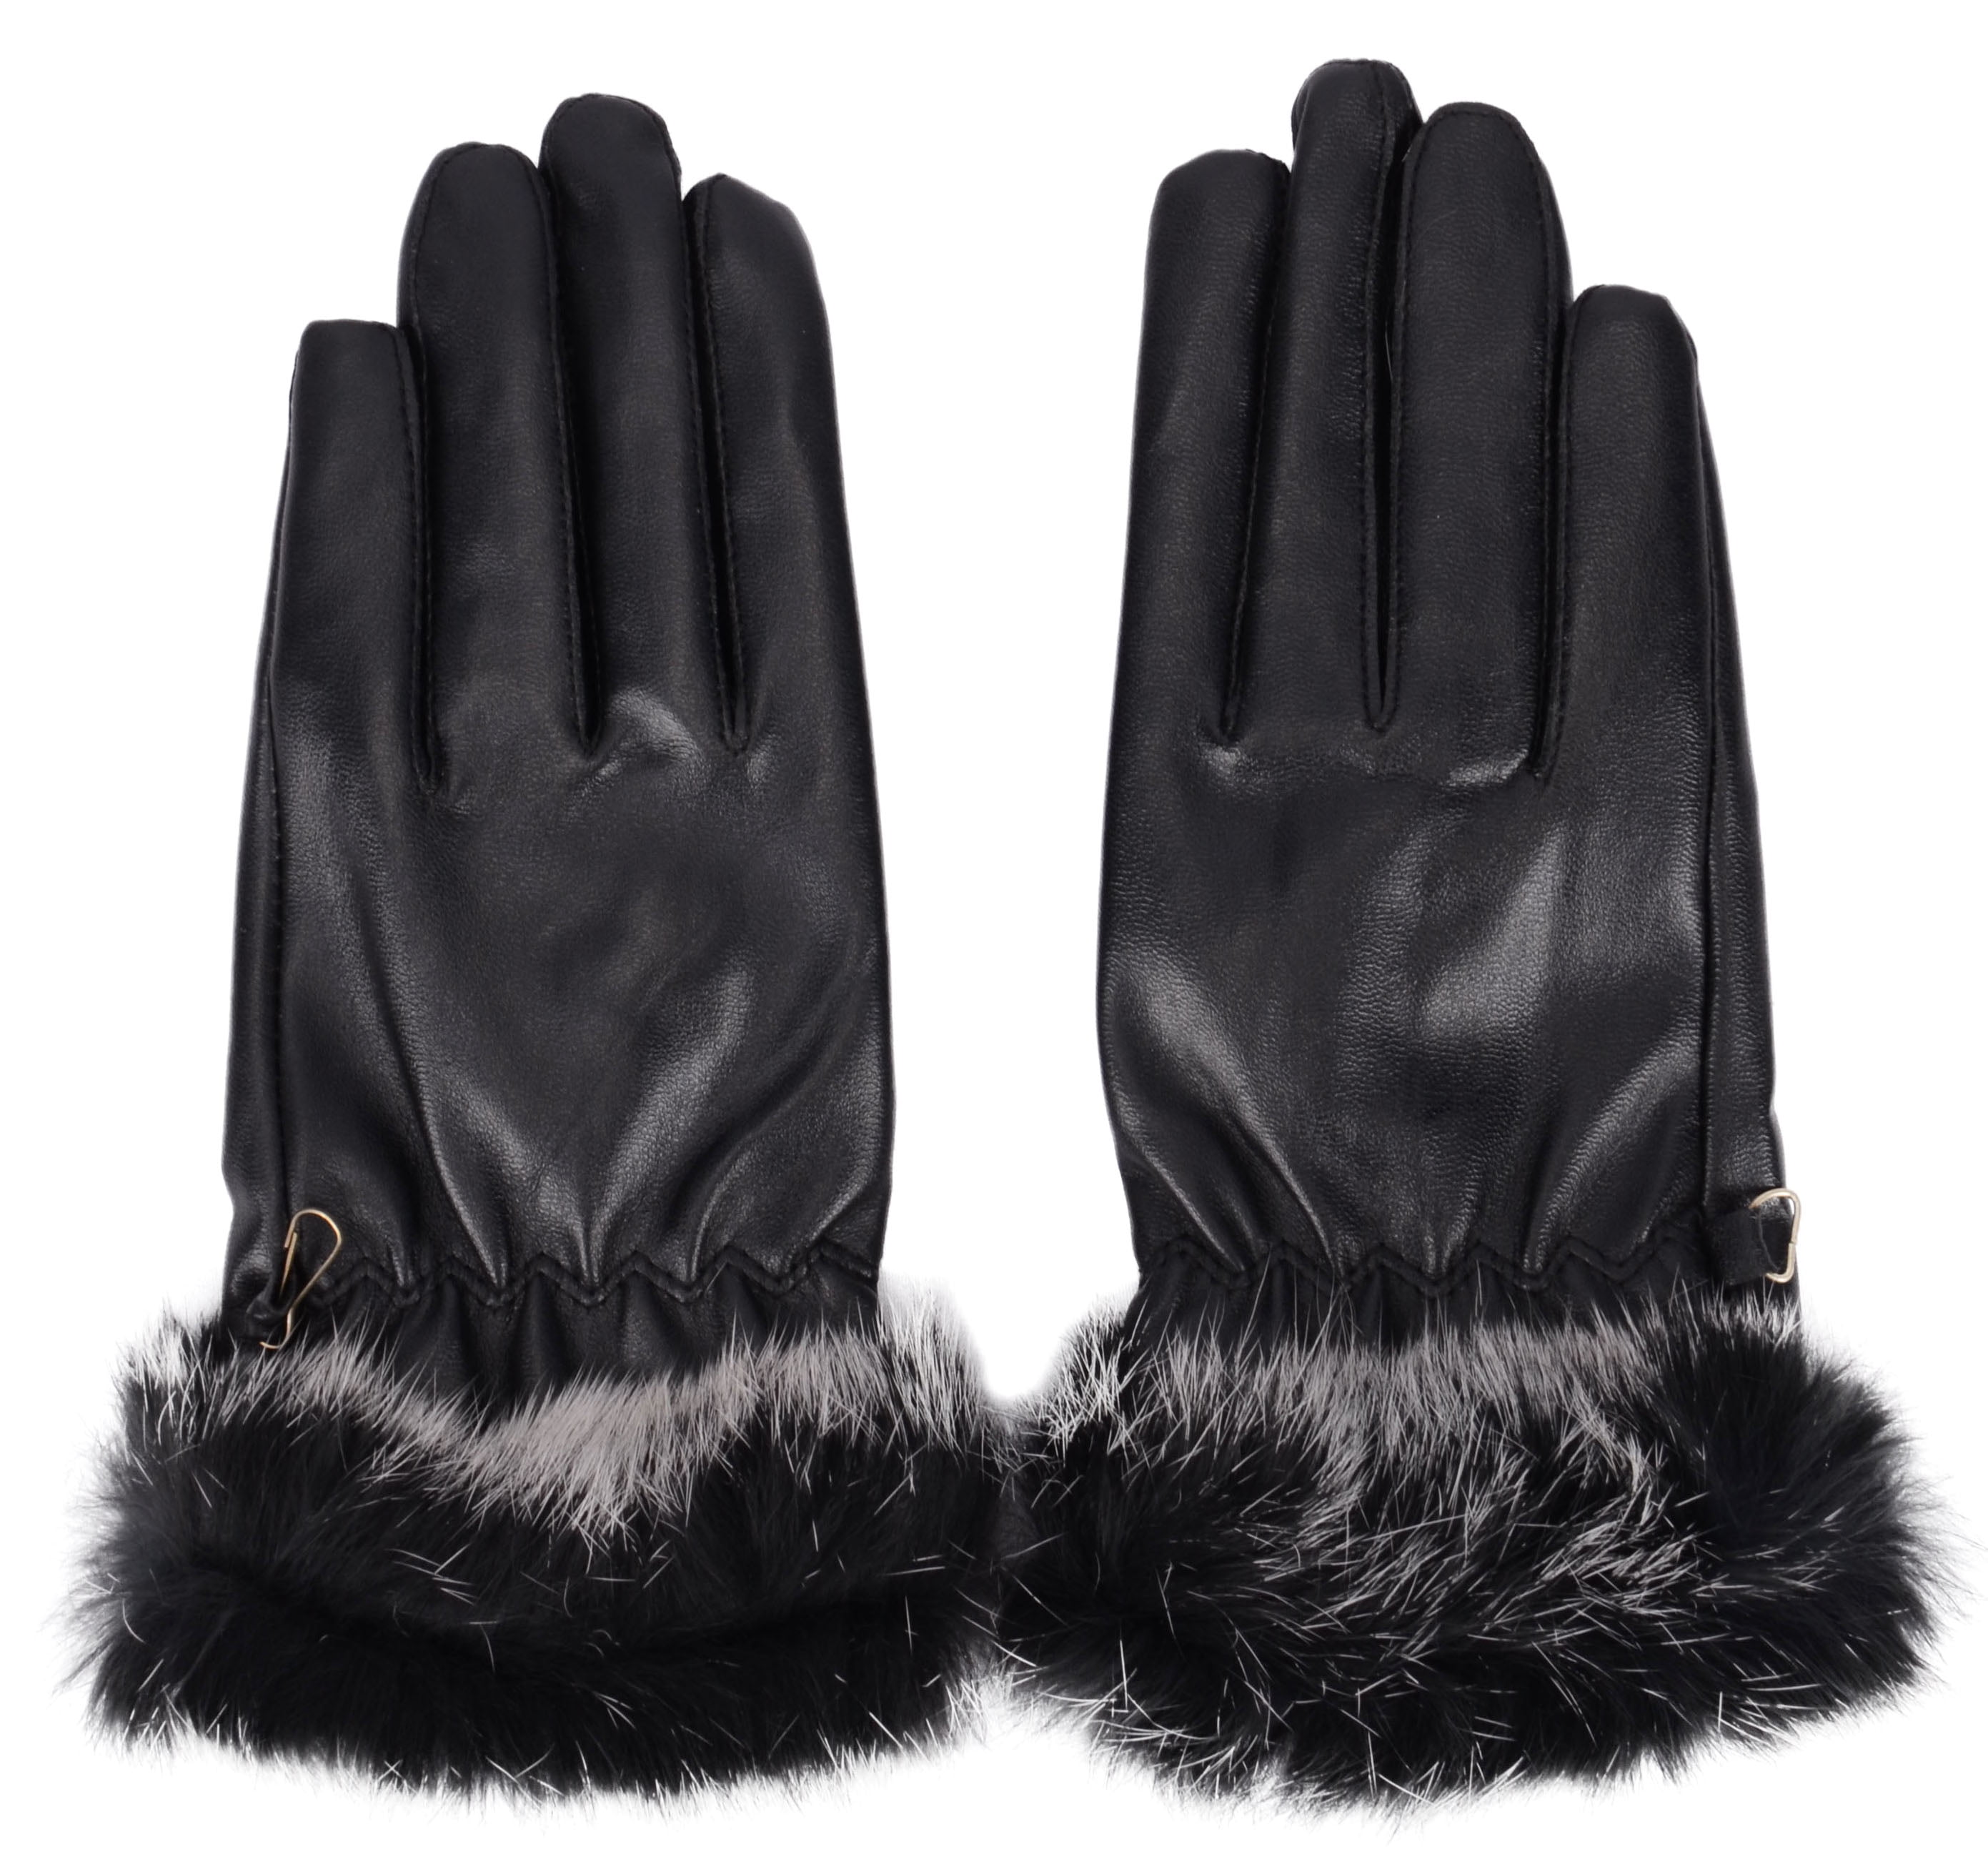 Simplicity Women Long Winter Faux Leather Gloves with Fur Cuff, Ater ...